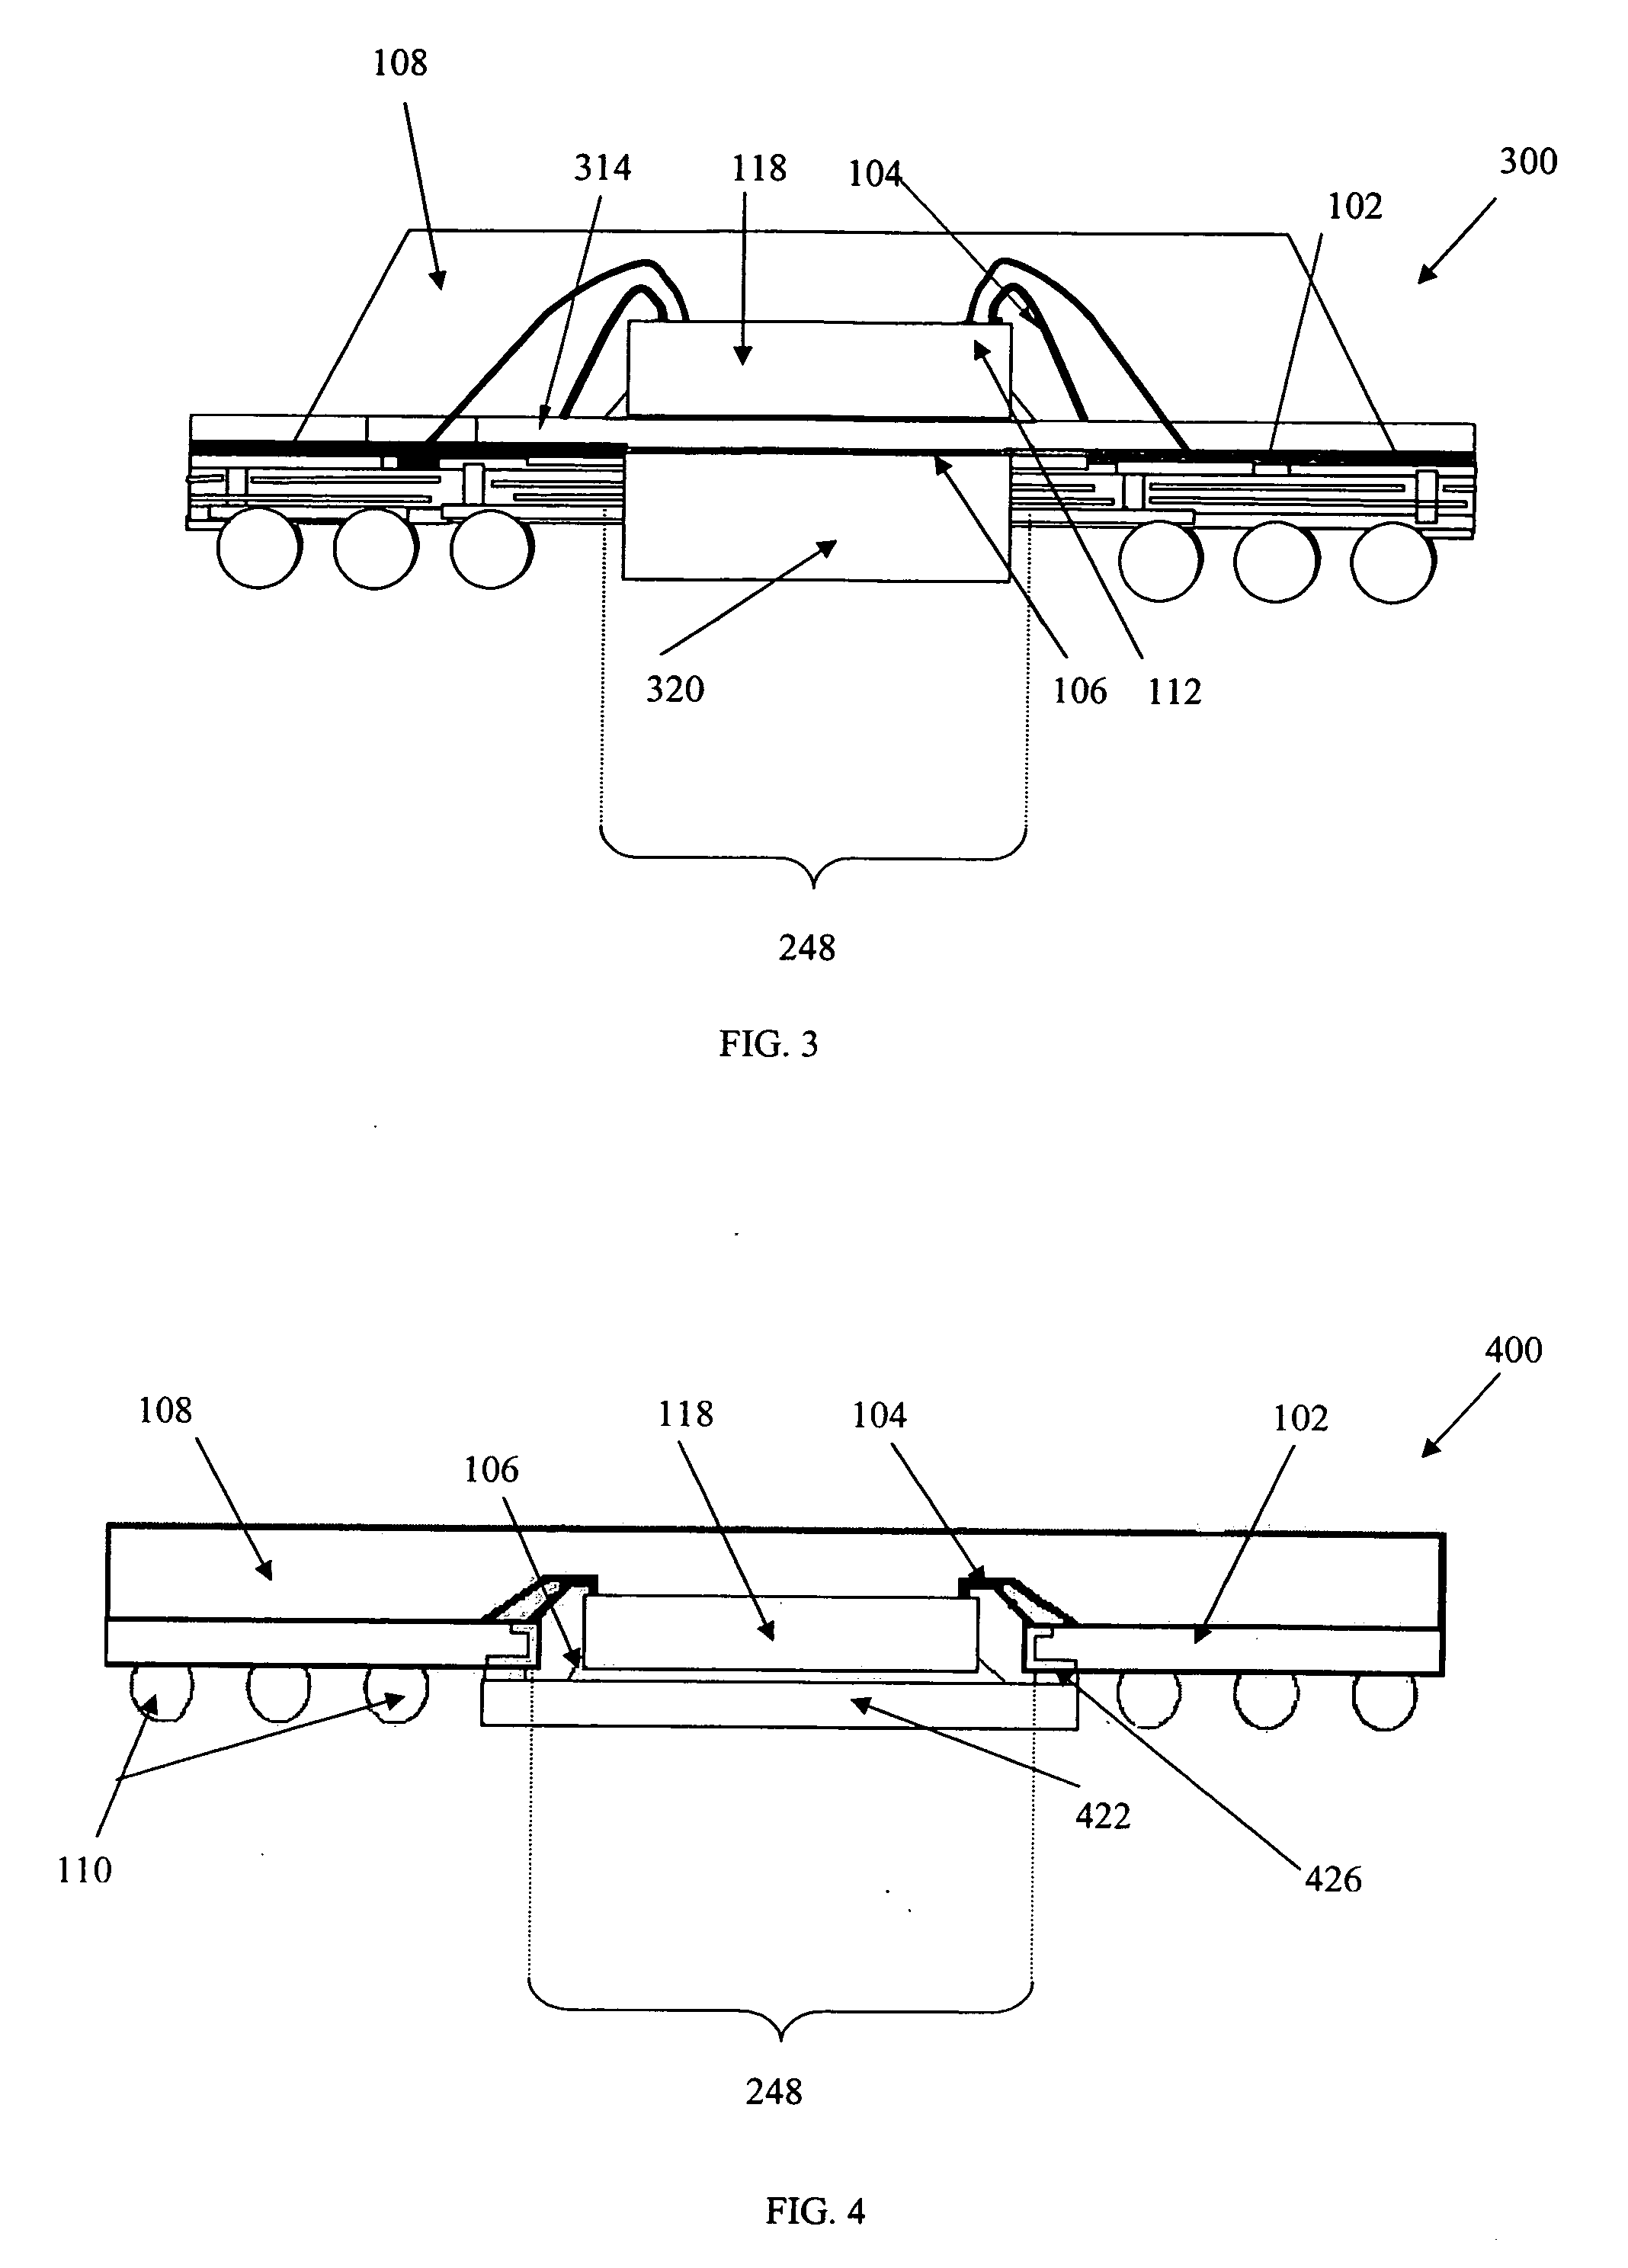 Integrated circuit package having exposed thermally conducting body